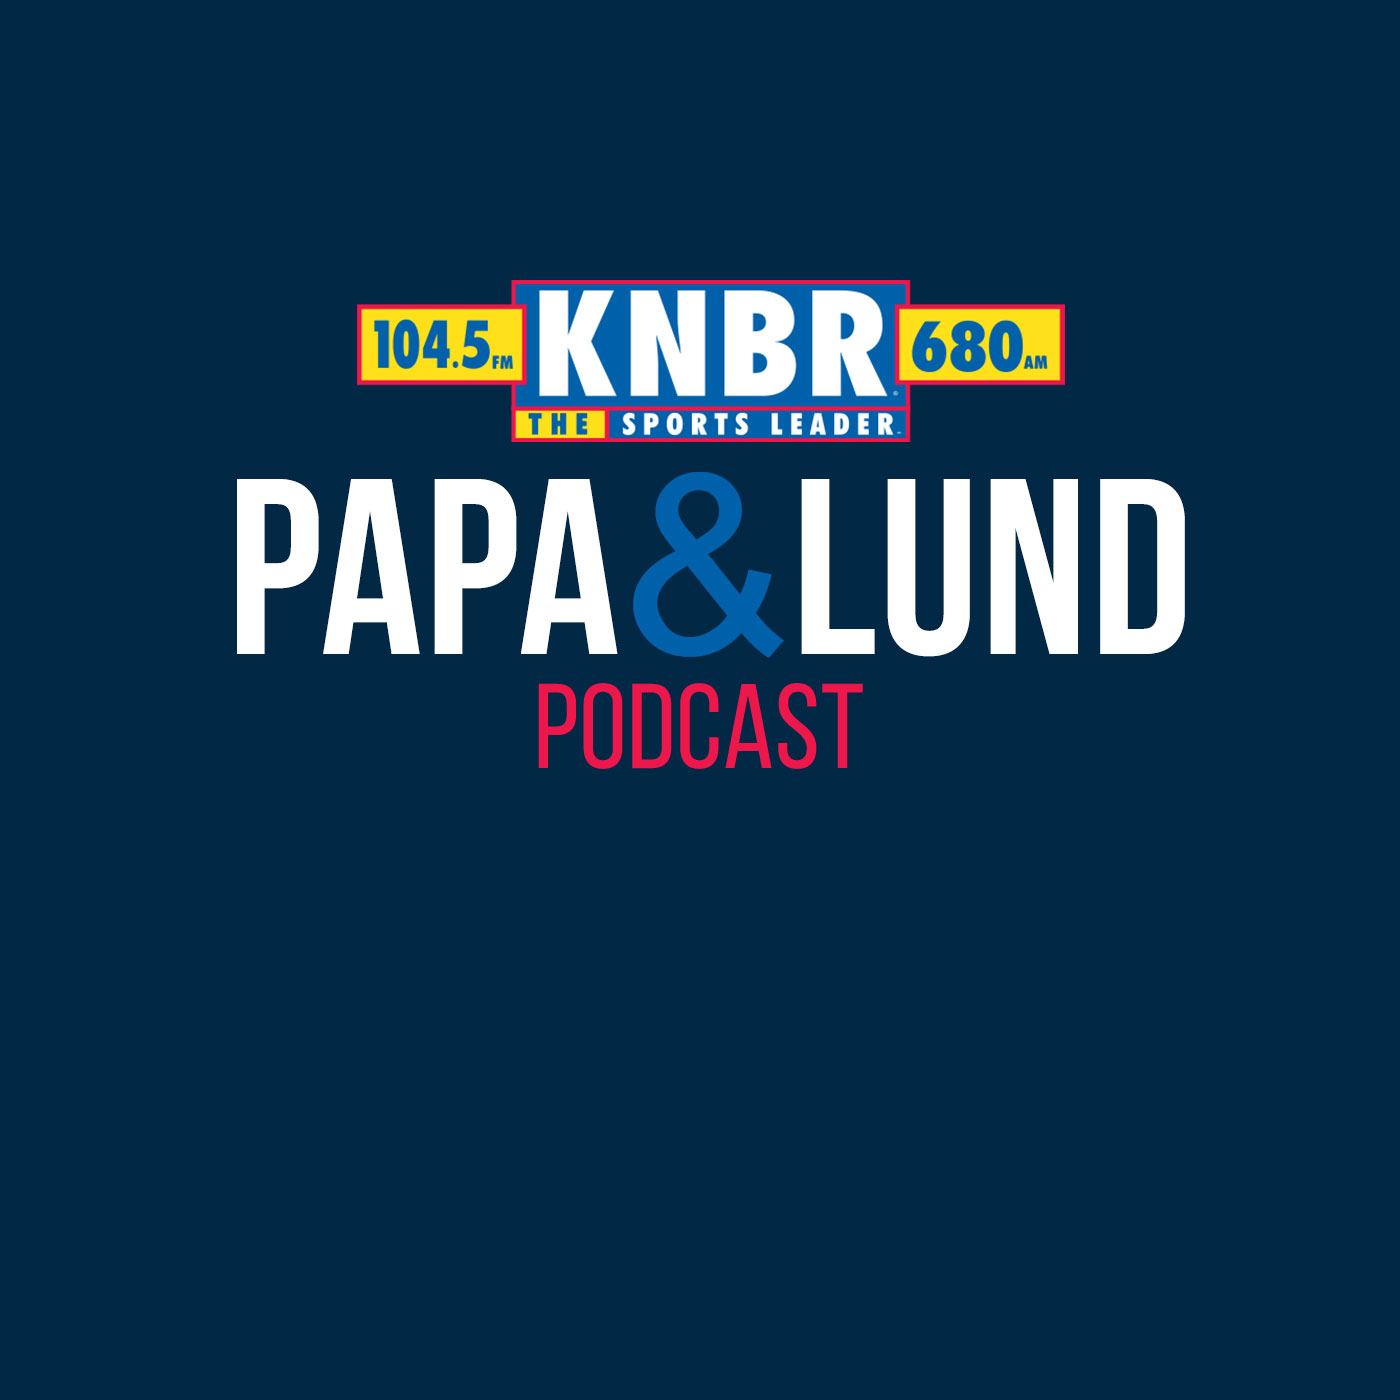 12-11 Matt Barrows joins Papa & Lund to discuss the how the 49ers continue to roll as they now hold the #1 Seed in the NFC